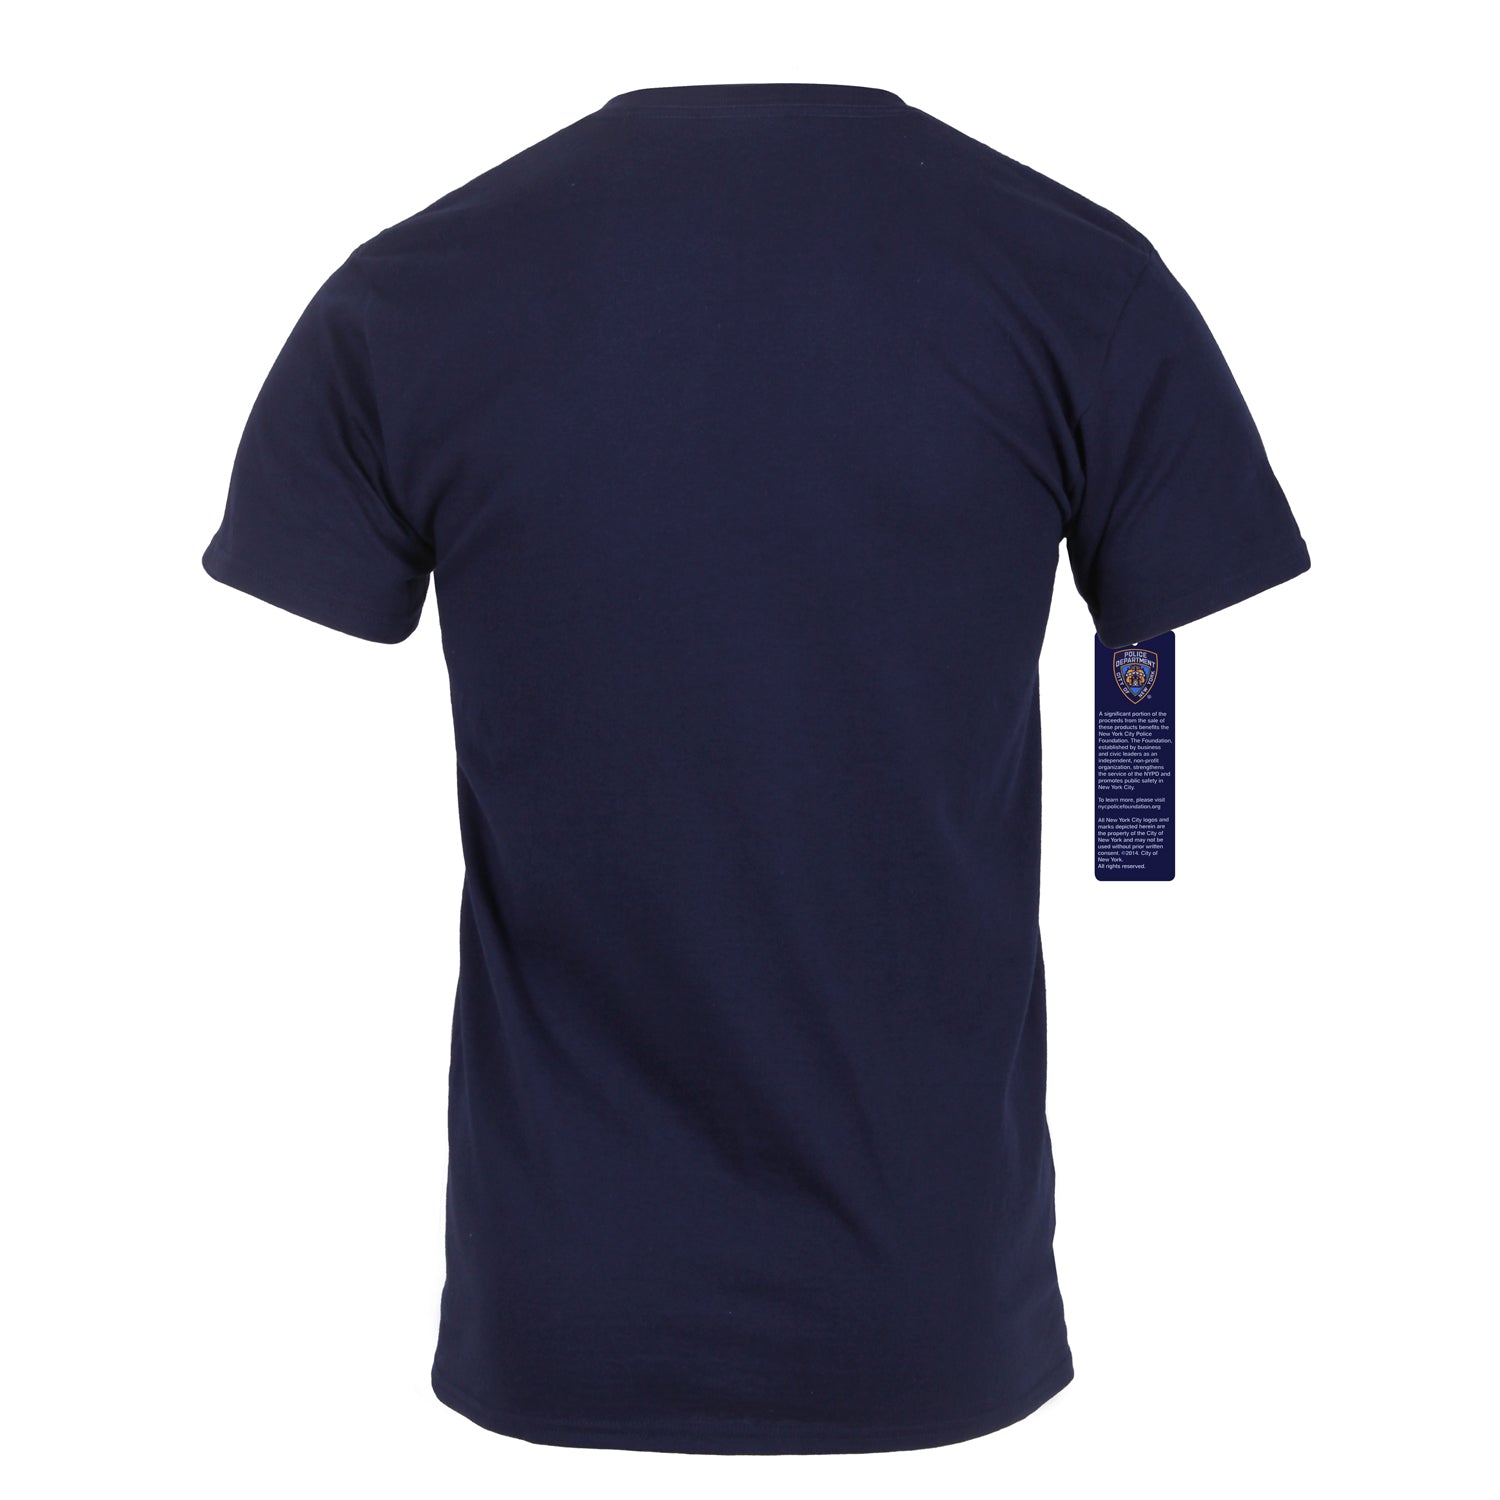 Rothco Officially Licensed NYPD T-shirt